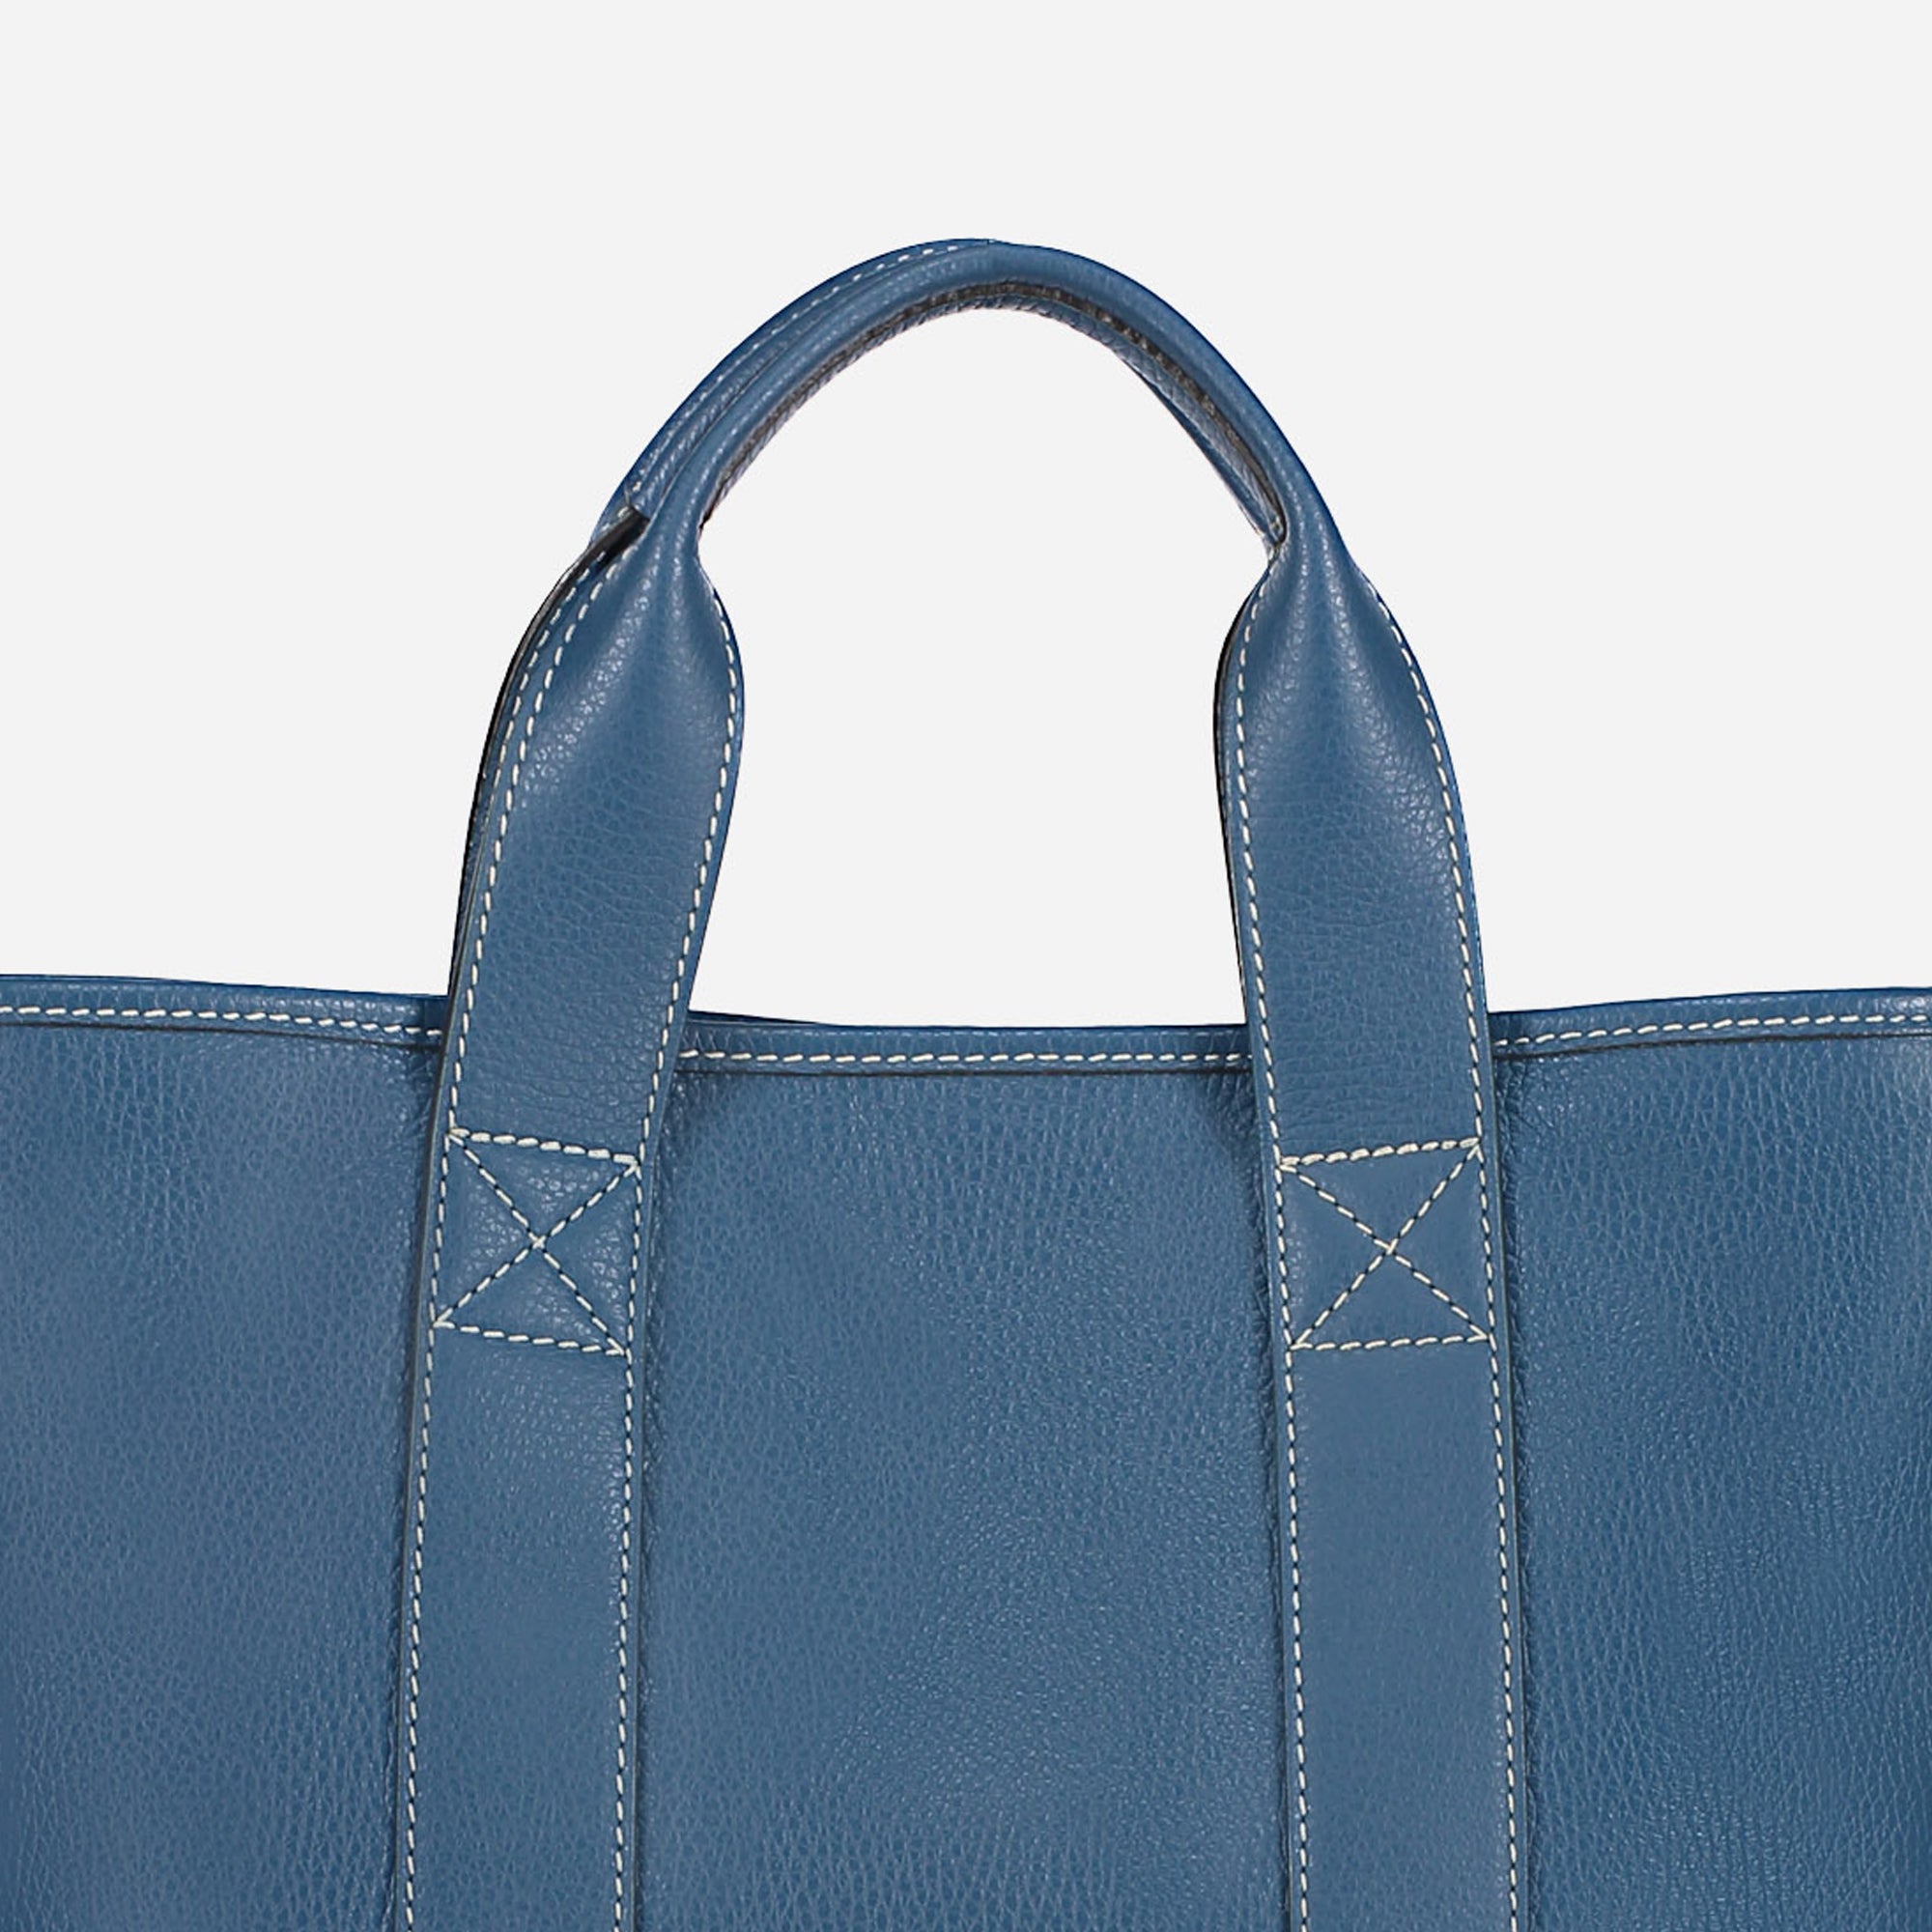 387-TOTE BAG<br> Calfskin leather tote